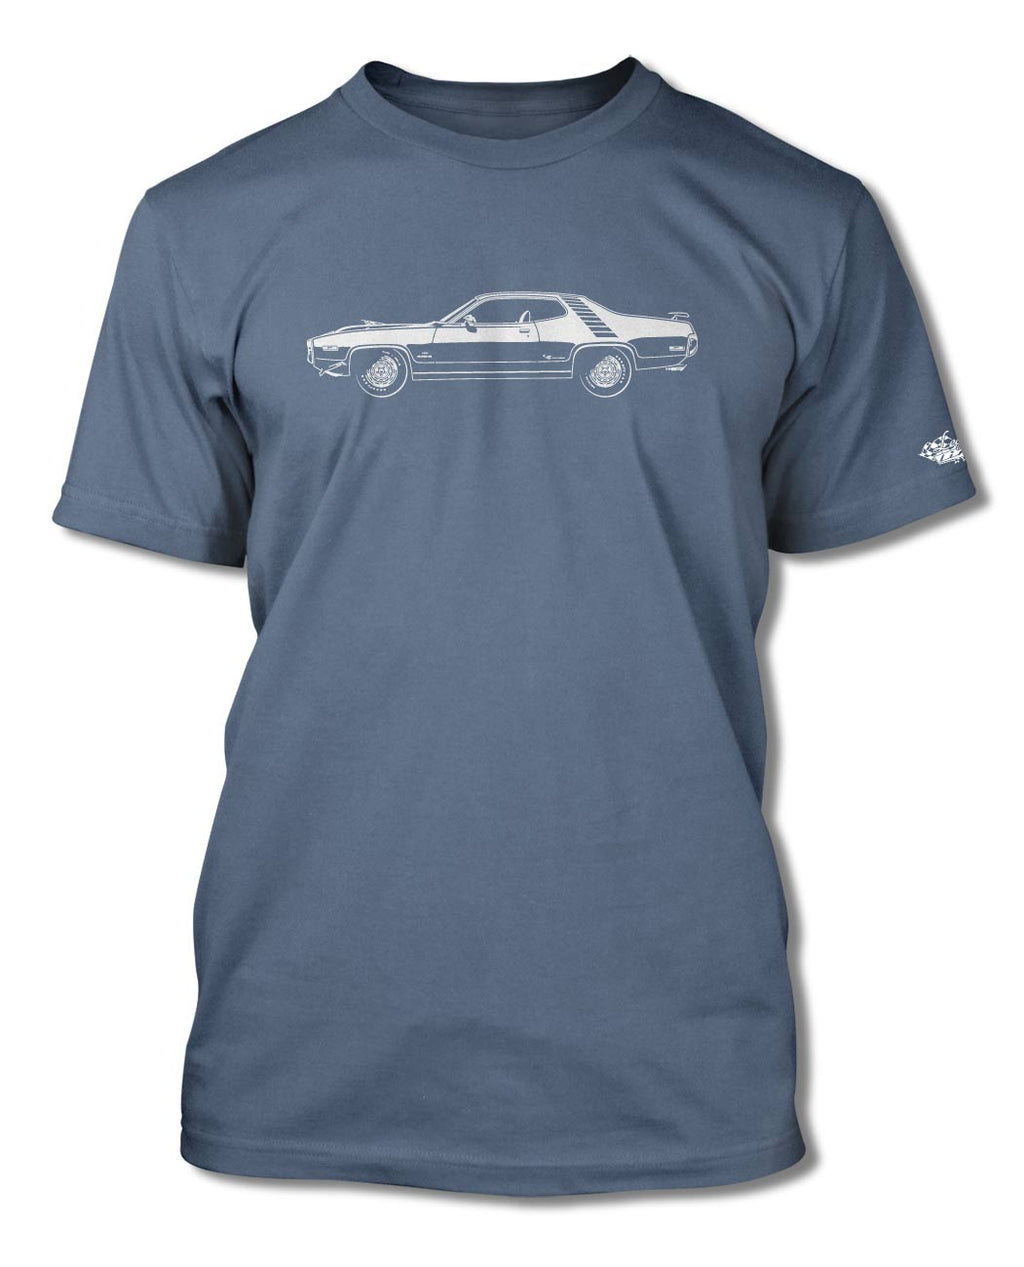 1972 Plymouth Road Runner 440-6 Coupe T-Shirt - Men - Side View